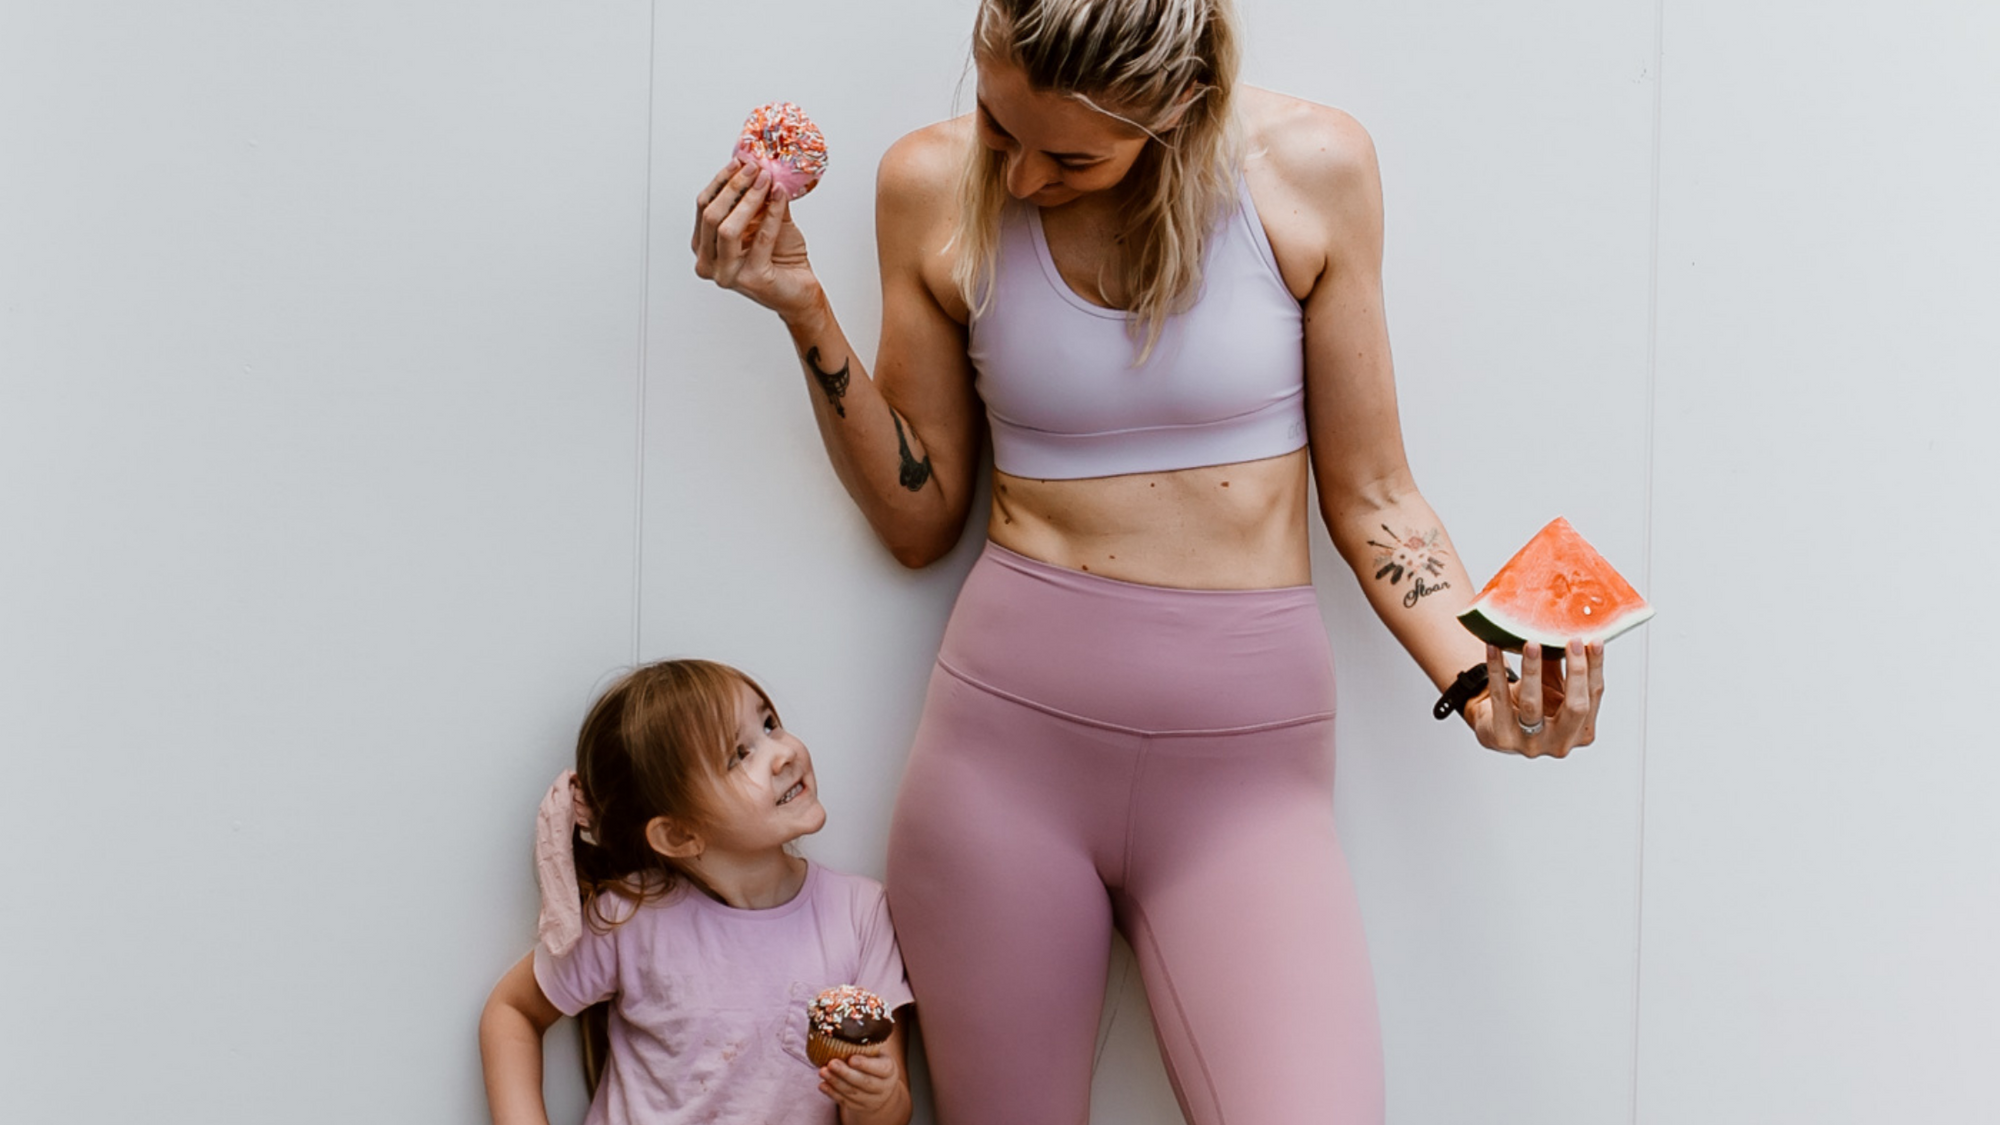 busy mum? Here are some fitness tips